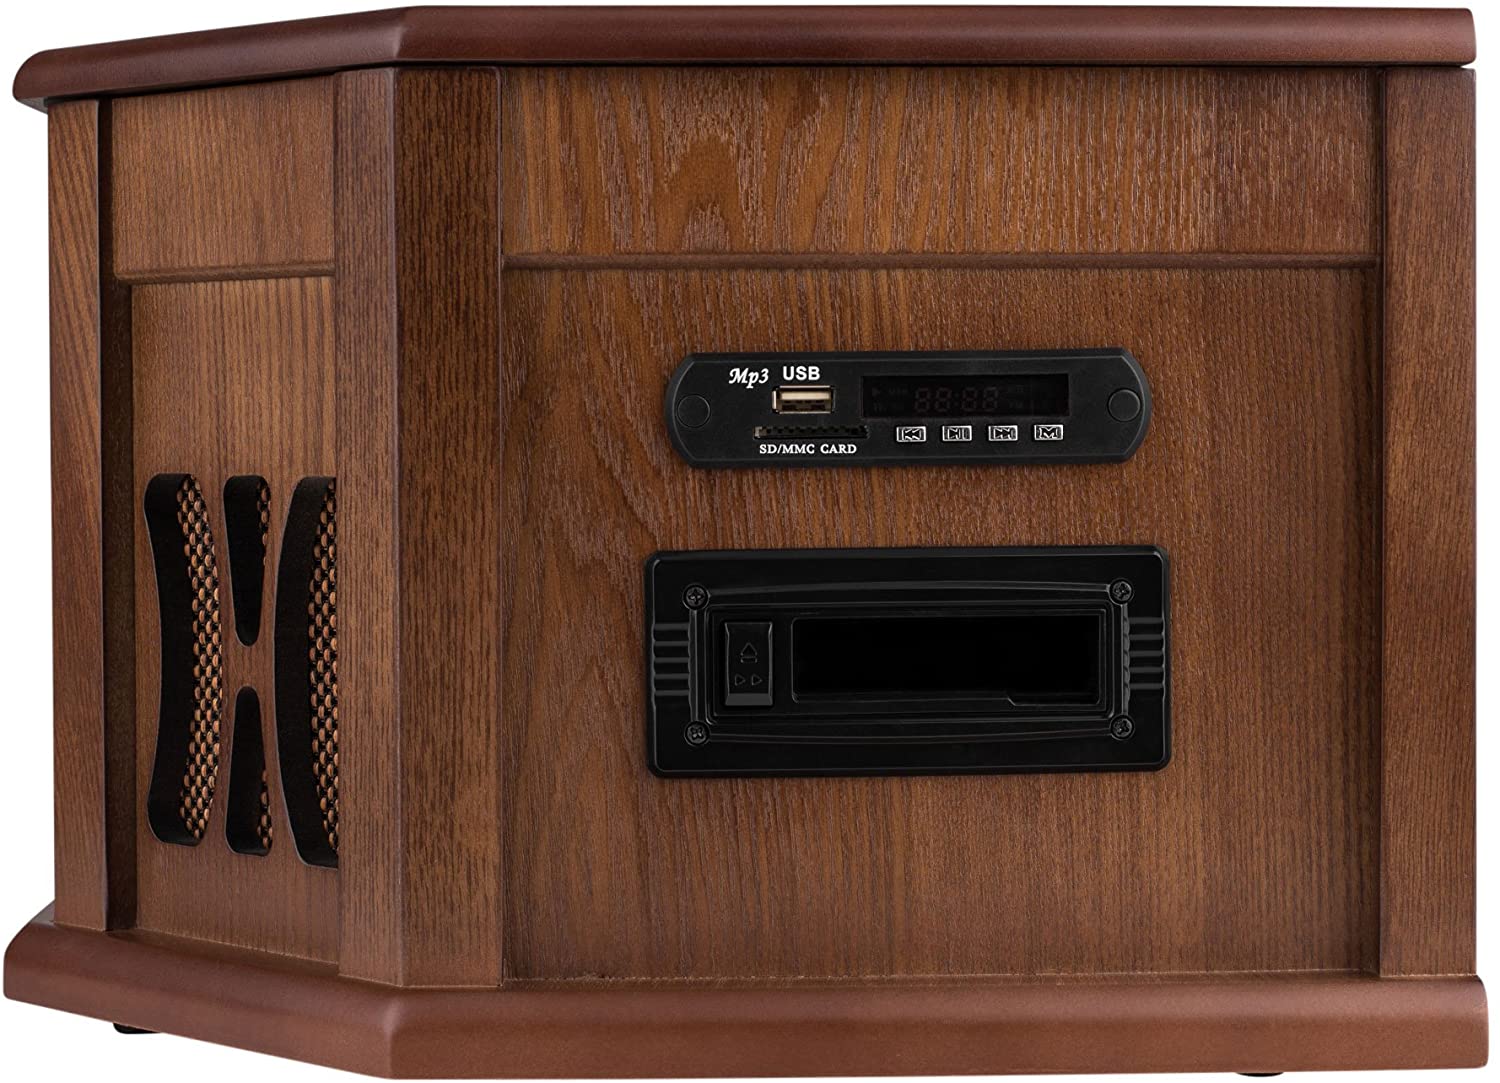 Boytone BT-25MB 8-in-1 Natural Wood Classic Turntable Stereo System with Bluetooth Connection, Vinyl Record Player, AM/FM, CD, Cassette, USB, SD Slot. 2 Built-in Speakers, Remote Control, MP3 Player - image 3 of 8